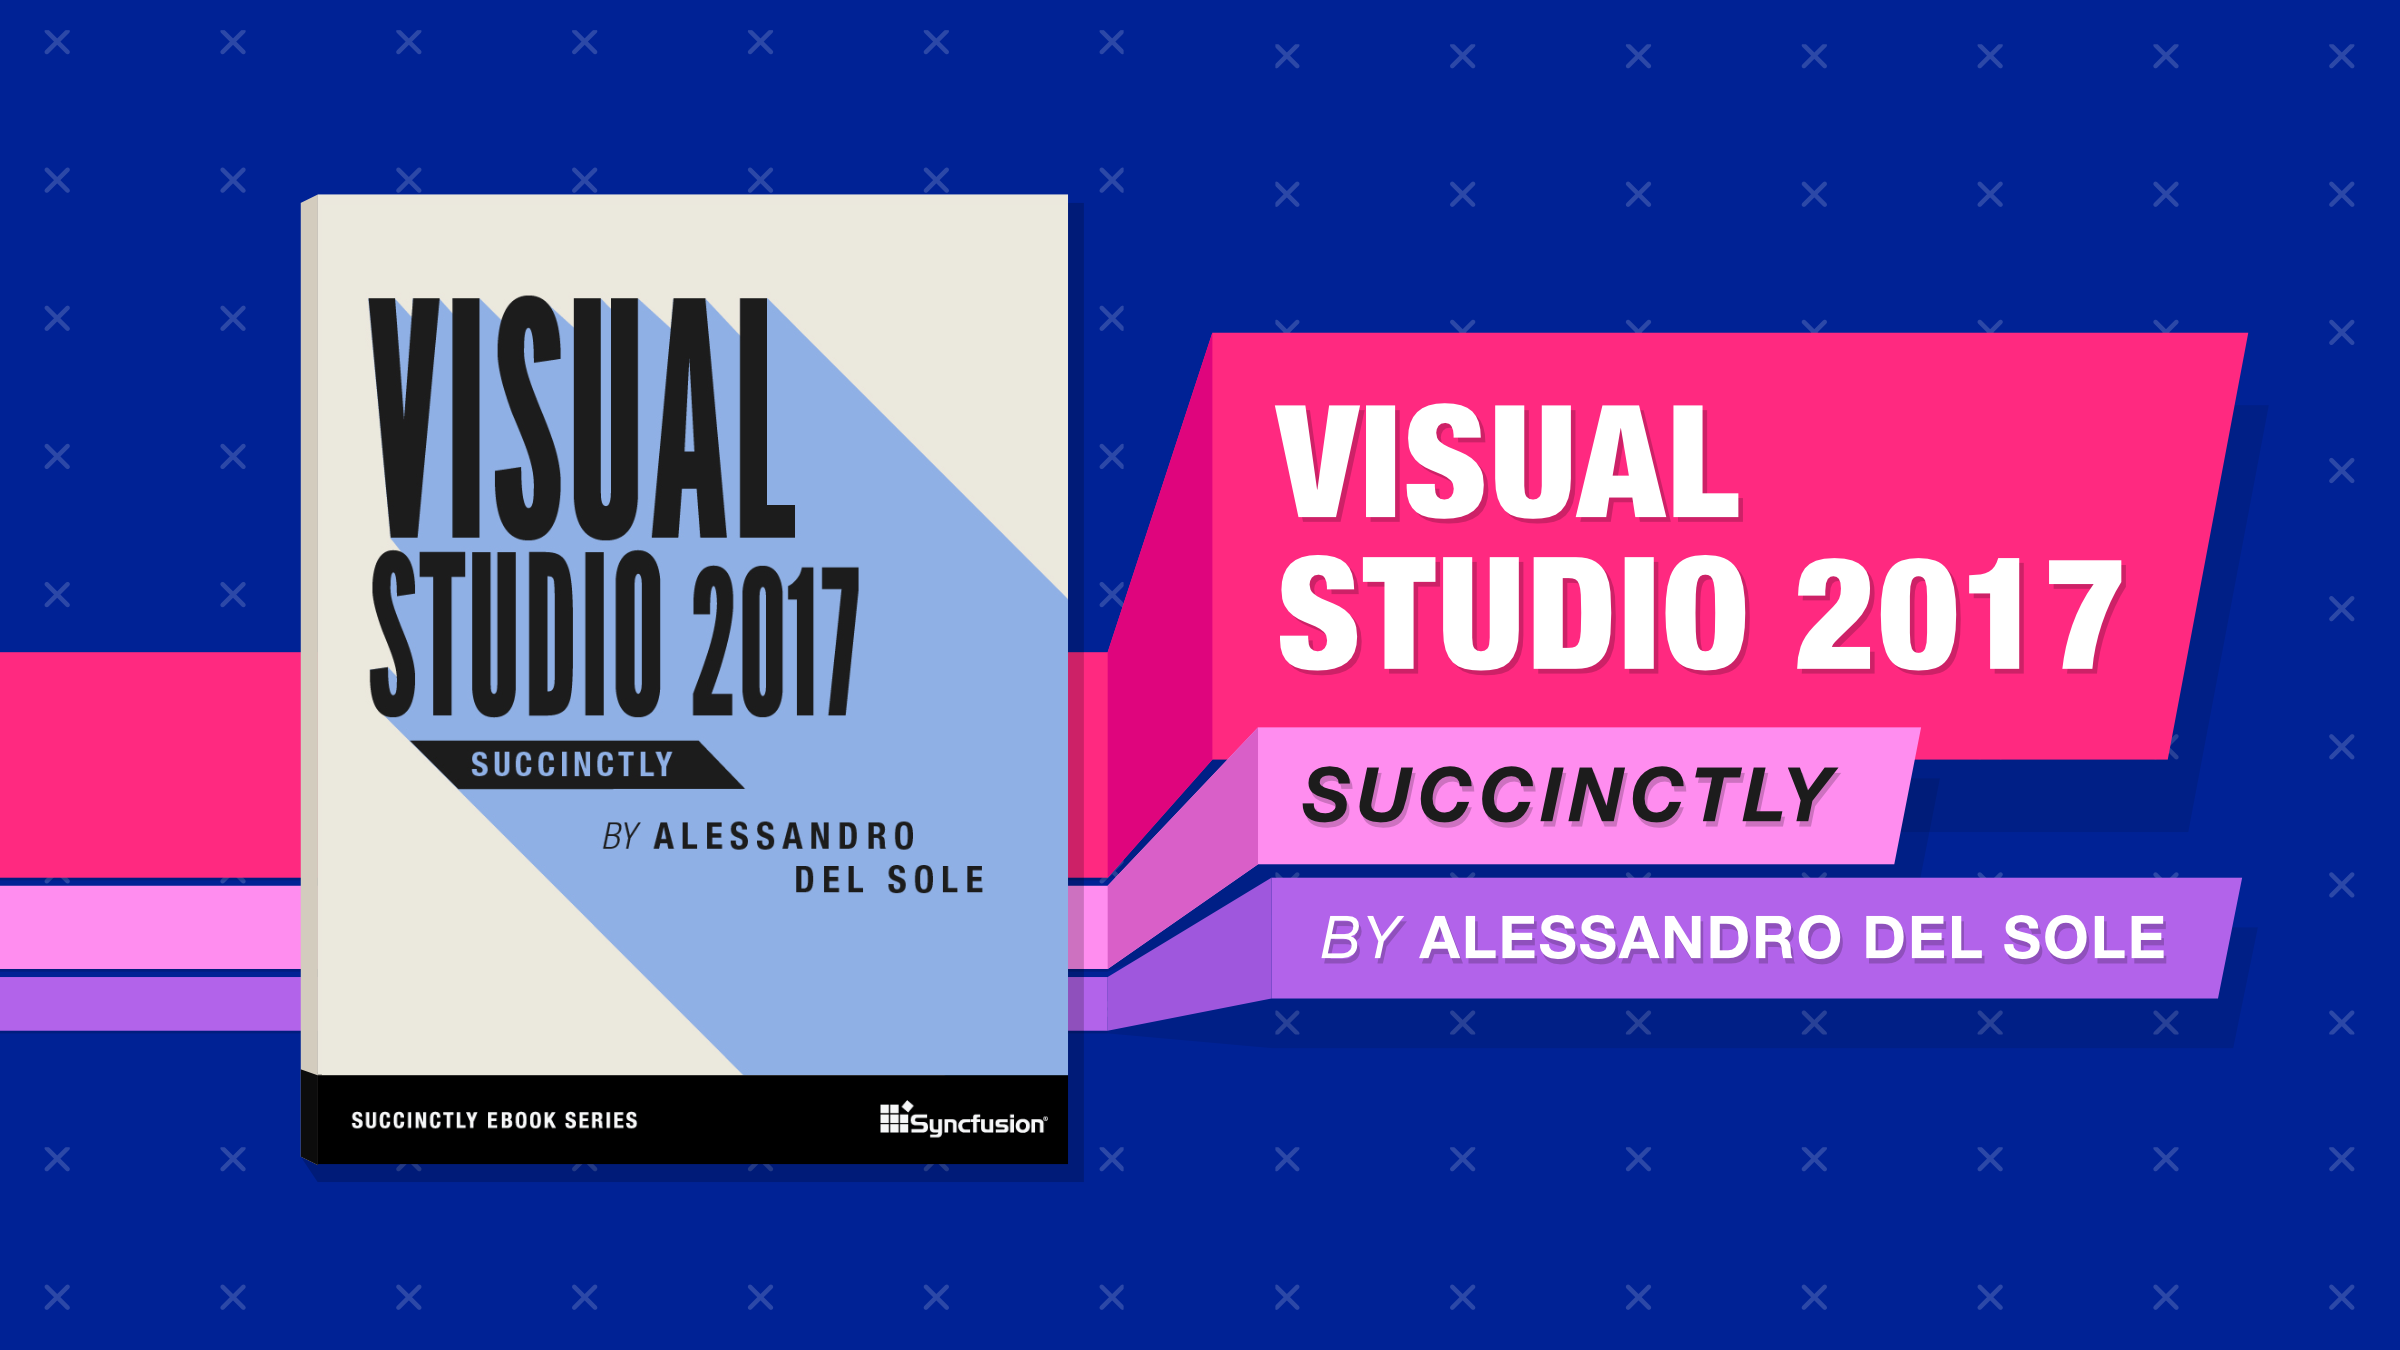 Visual Studio 2017 For Cloud And Web Development Visual Studio 2017 Succinctly Ebook - nuget gallery robloxnet 102